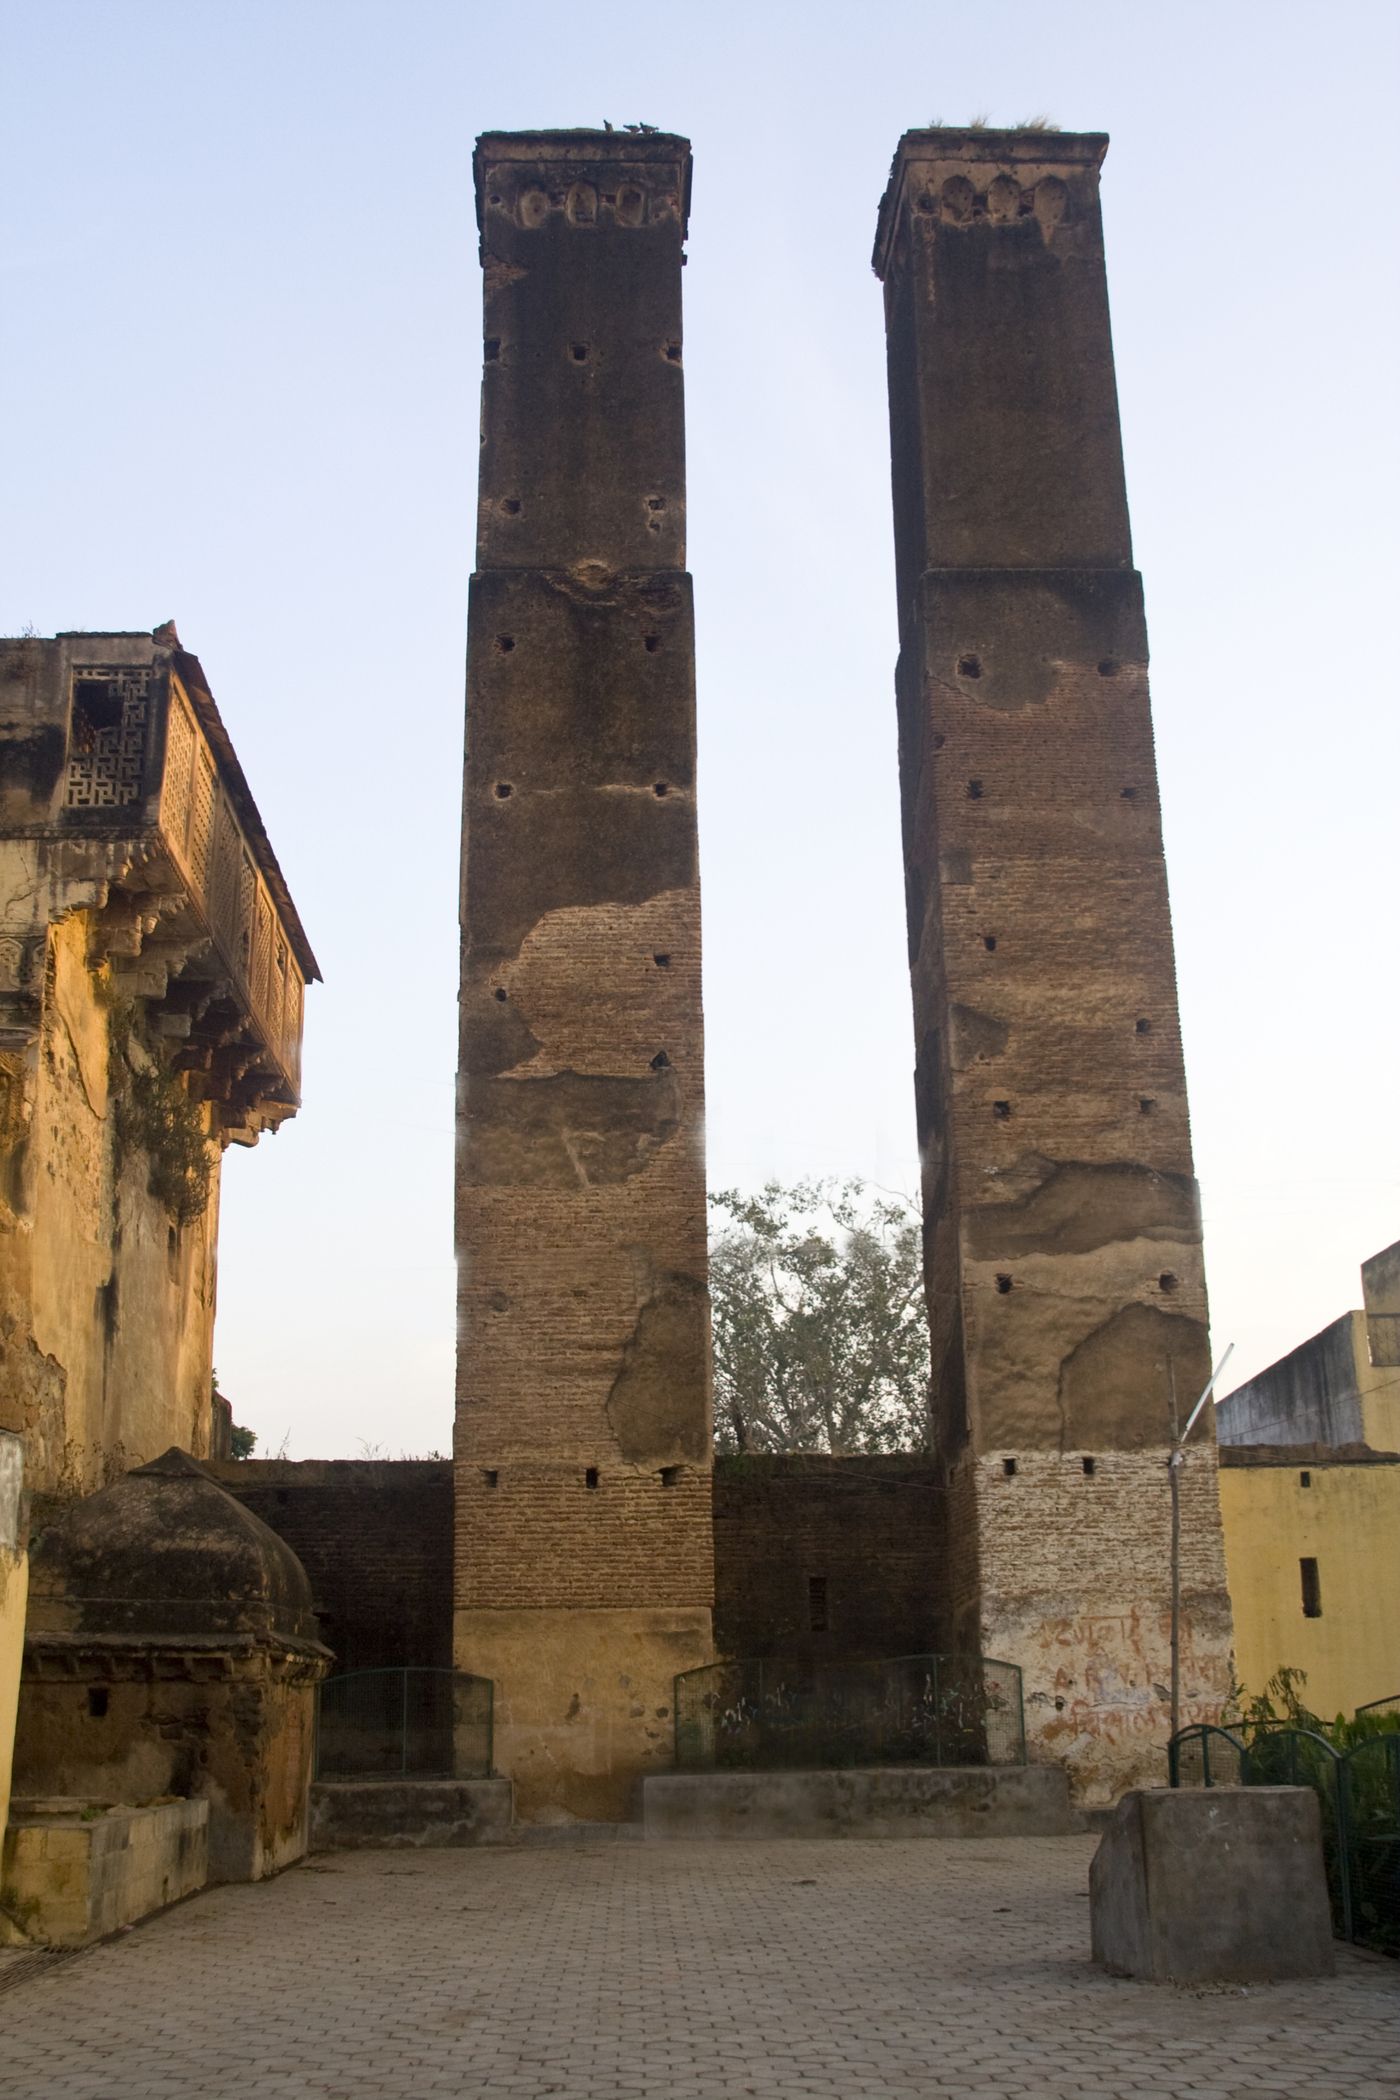 The imposing Sawan Bhadon Pillars in Phool Bagh, Orchha, an ingenious system for cooling the air through the perforated top to gather wind and the bottom of the pillars connected to a water reservoir 